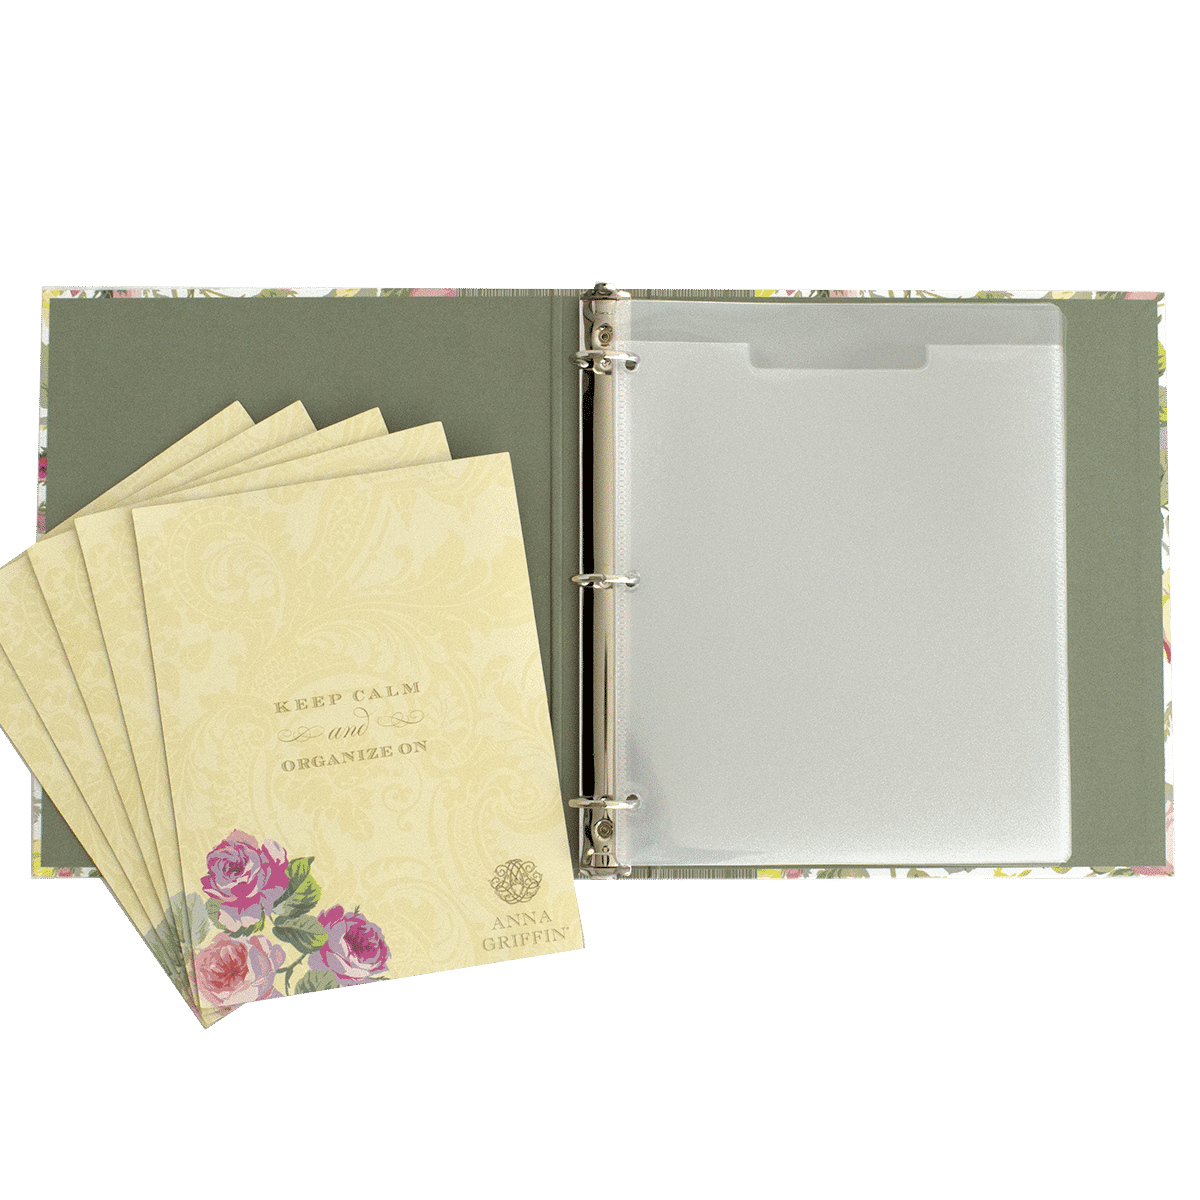 a set of five wedding guest book with a floral design.